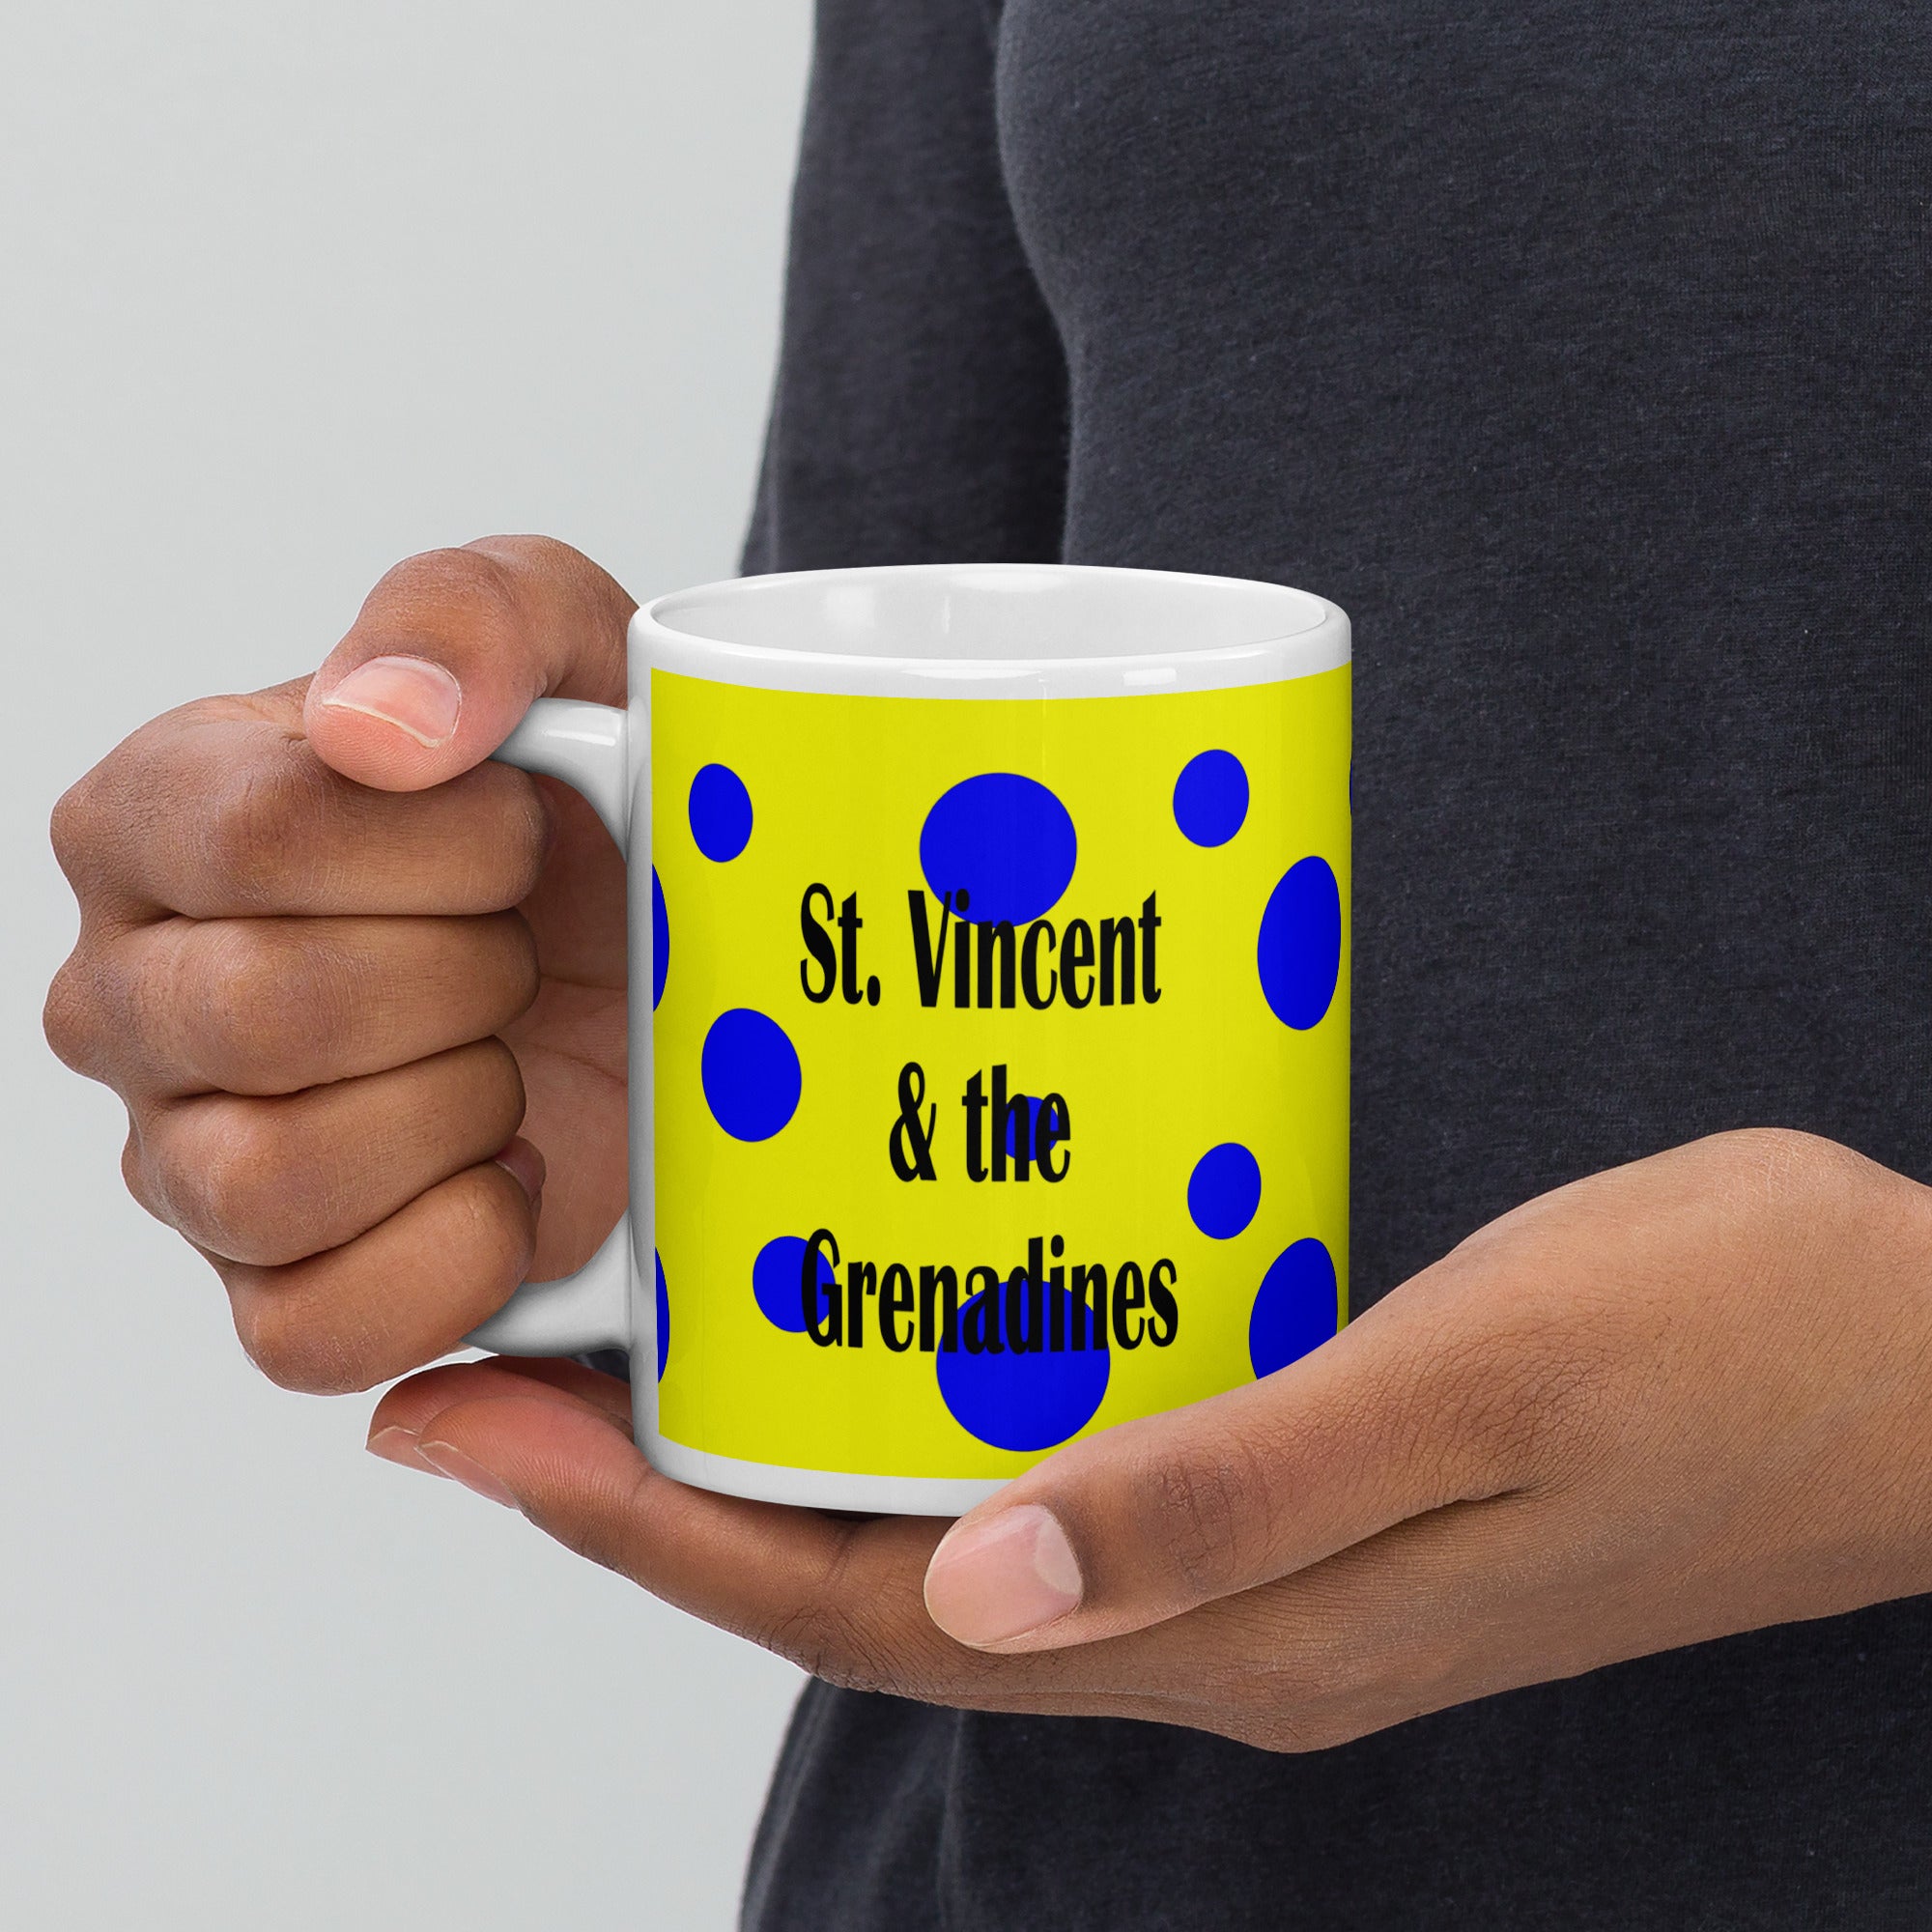 St. Vincent and the Grenadines 11oz ceramic mug  with blue spots on a yellow background